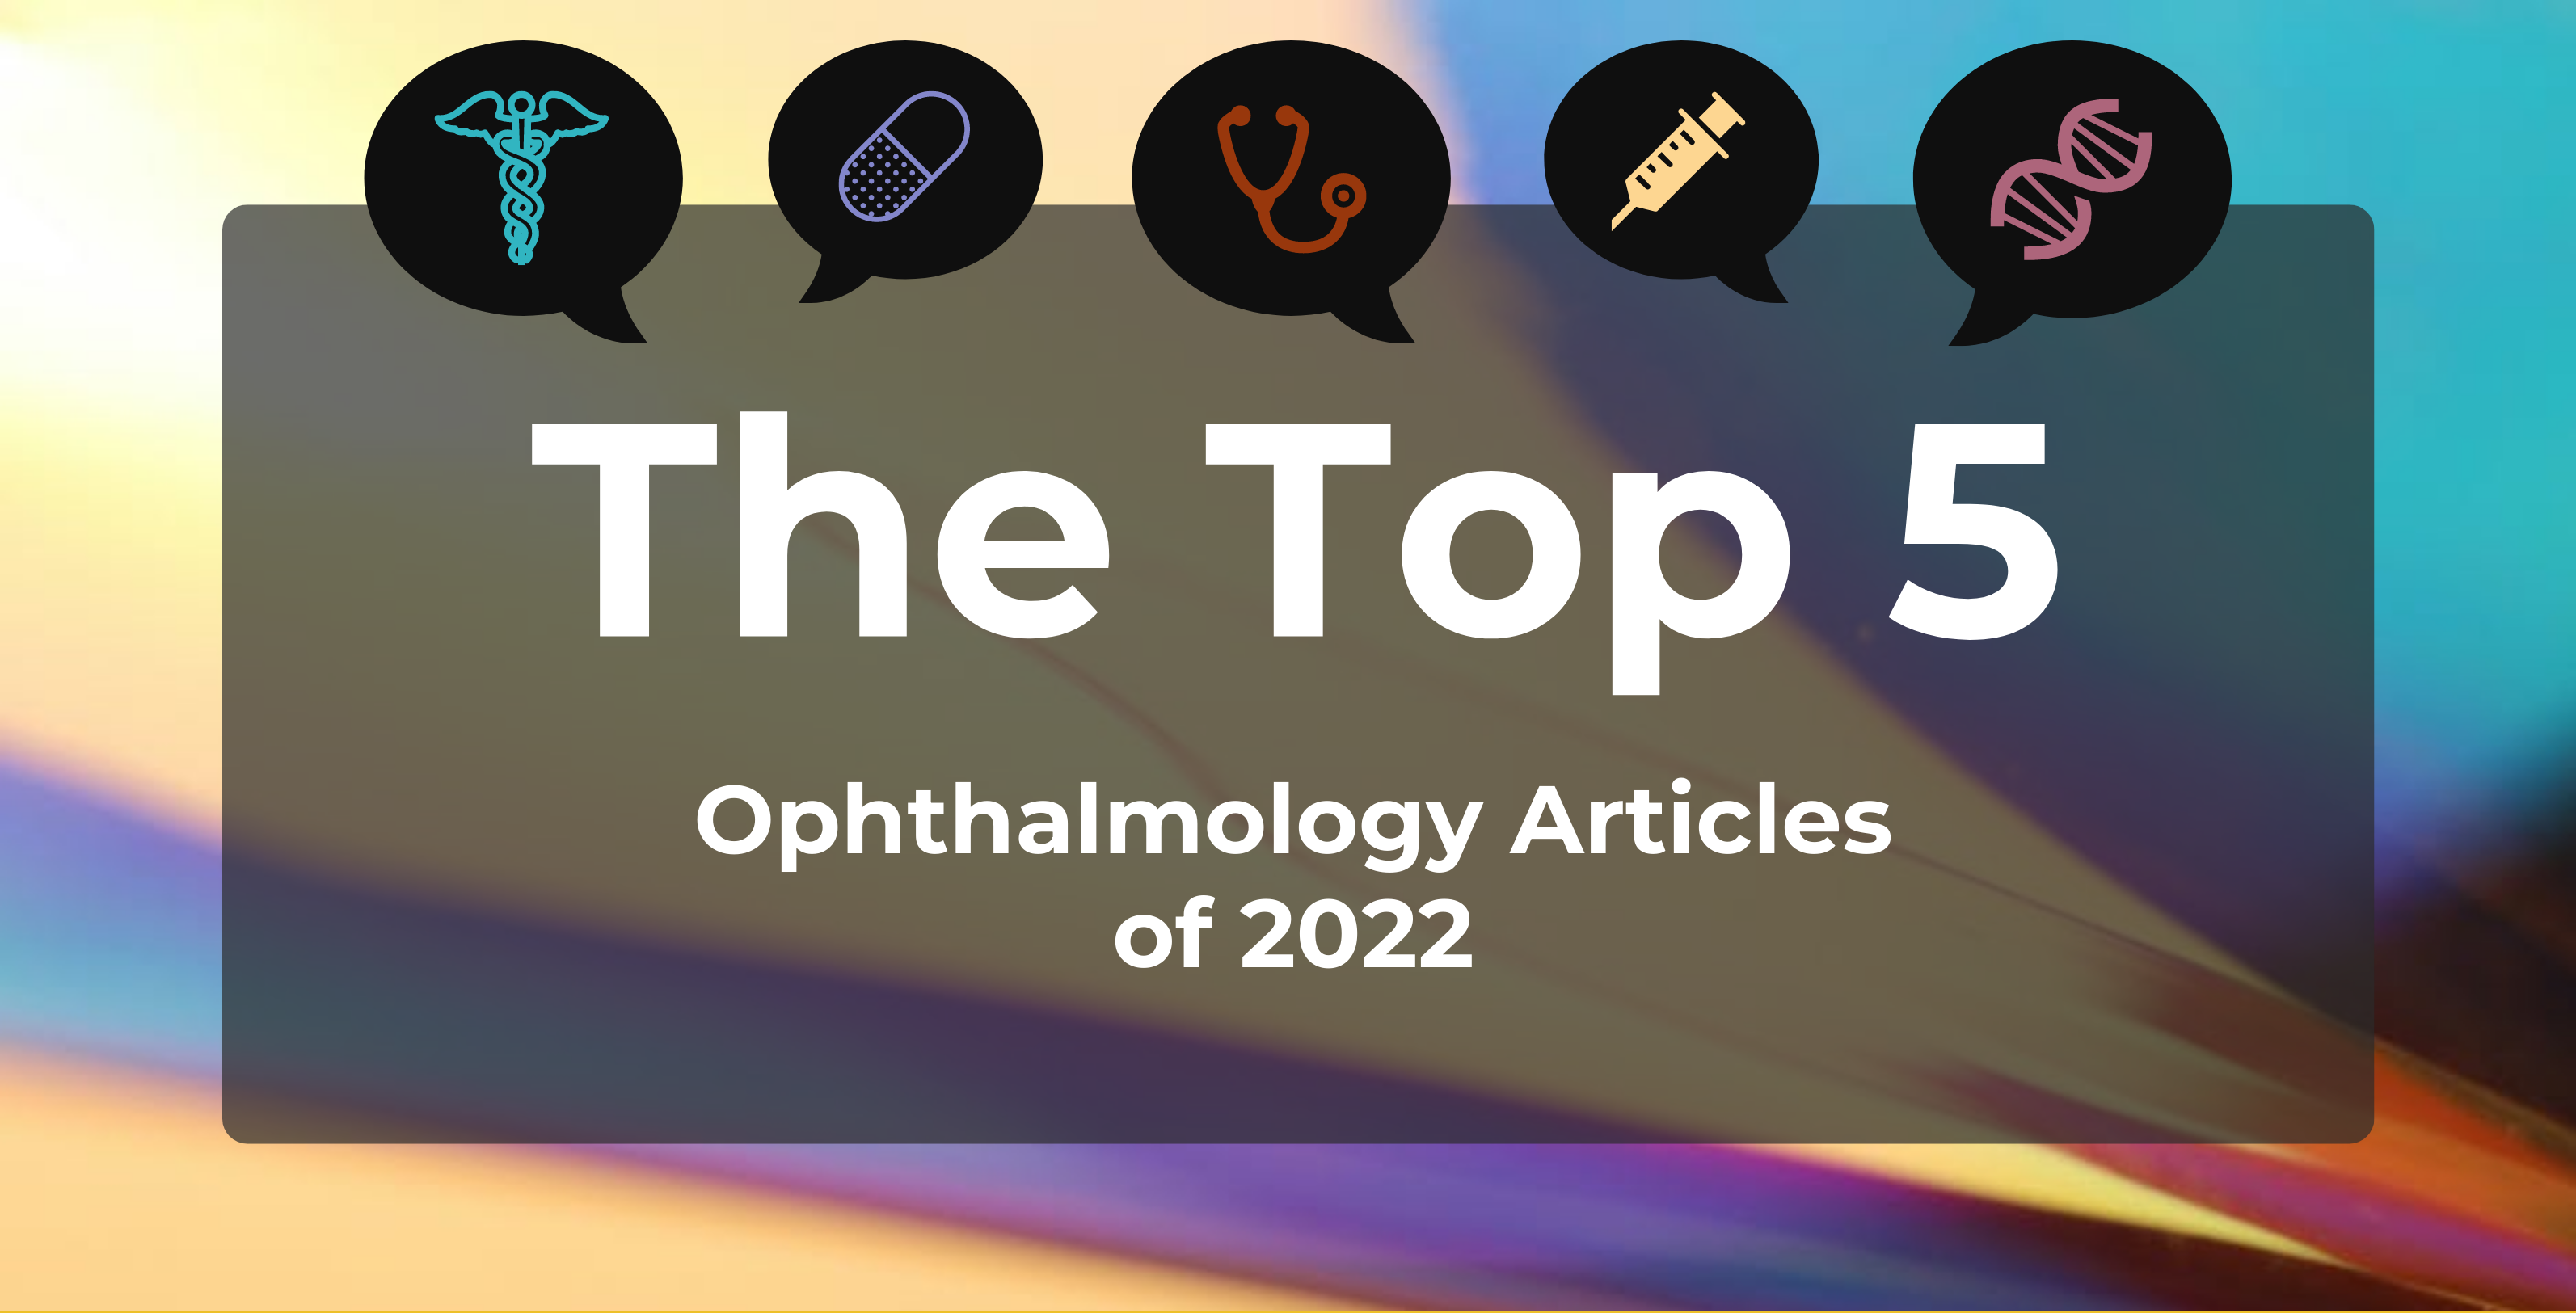 The Top 5 Ophthalmology Articles of 2022